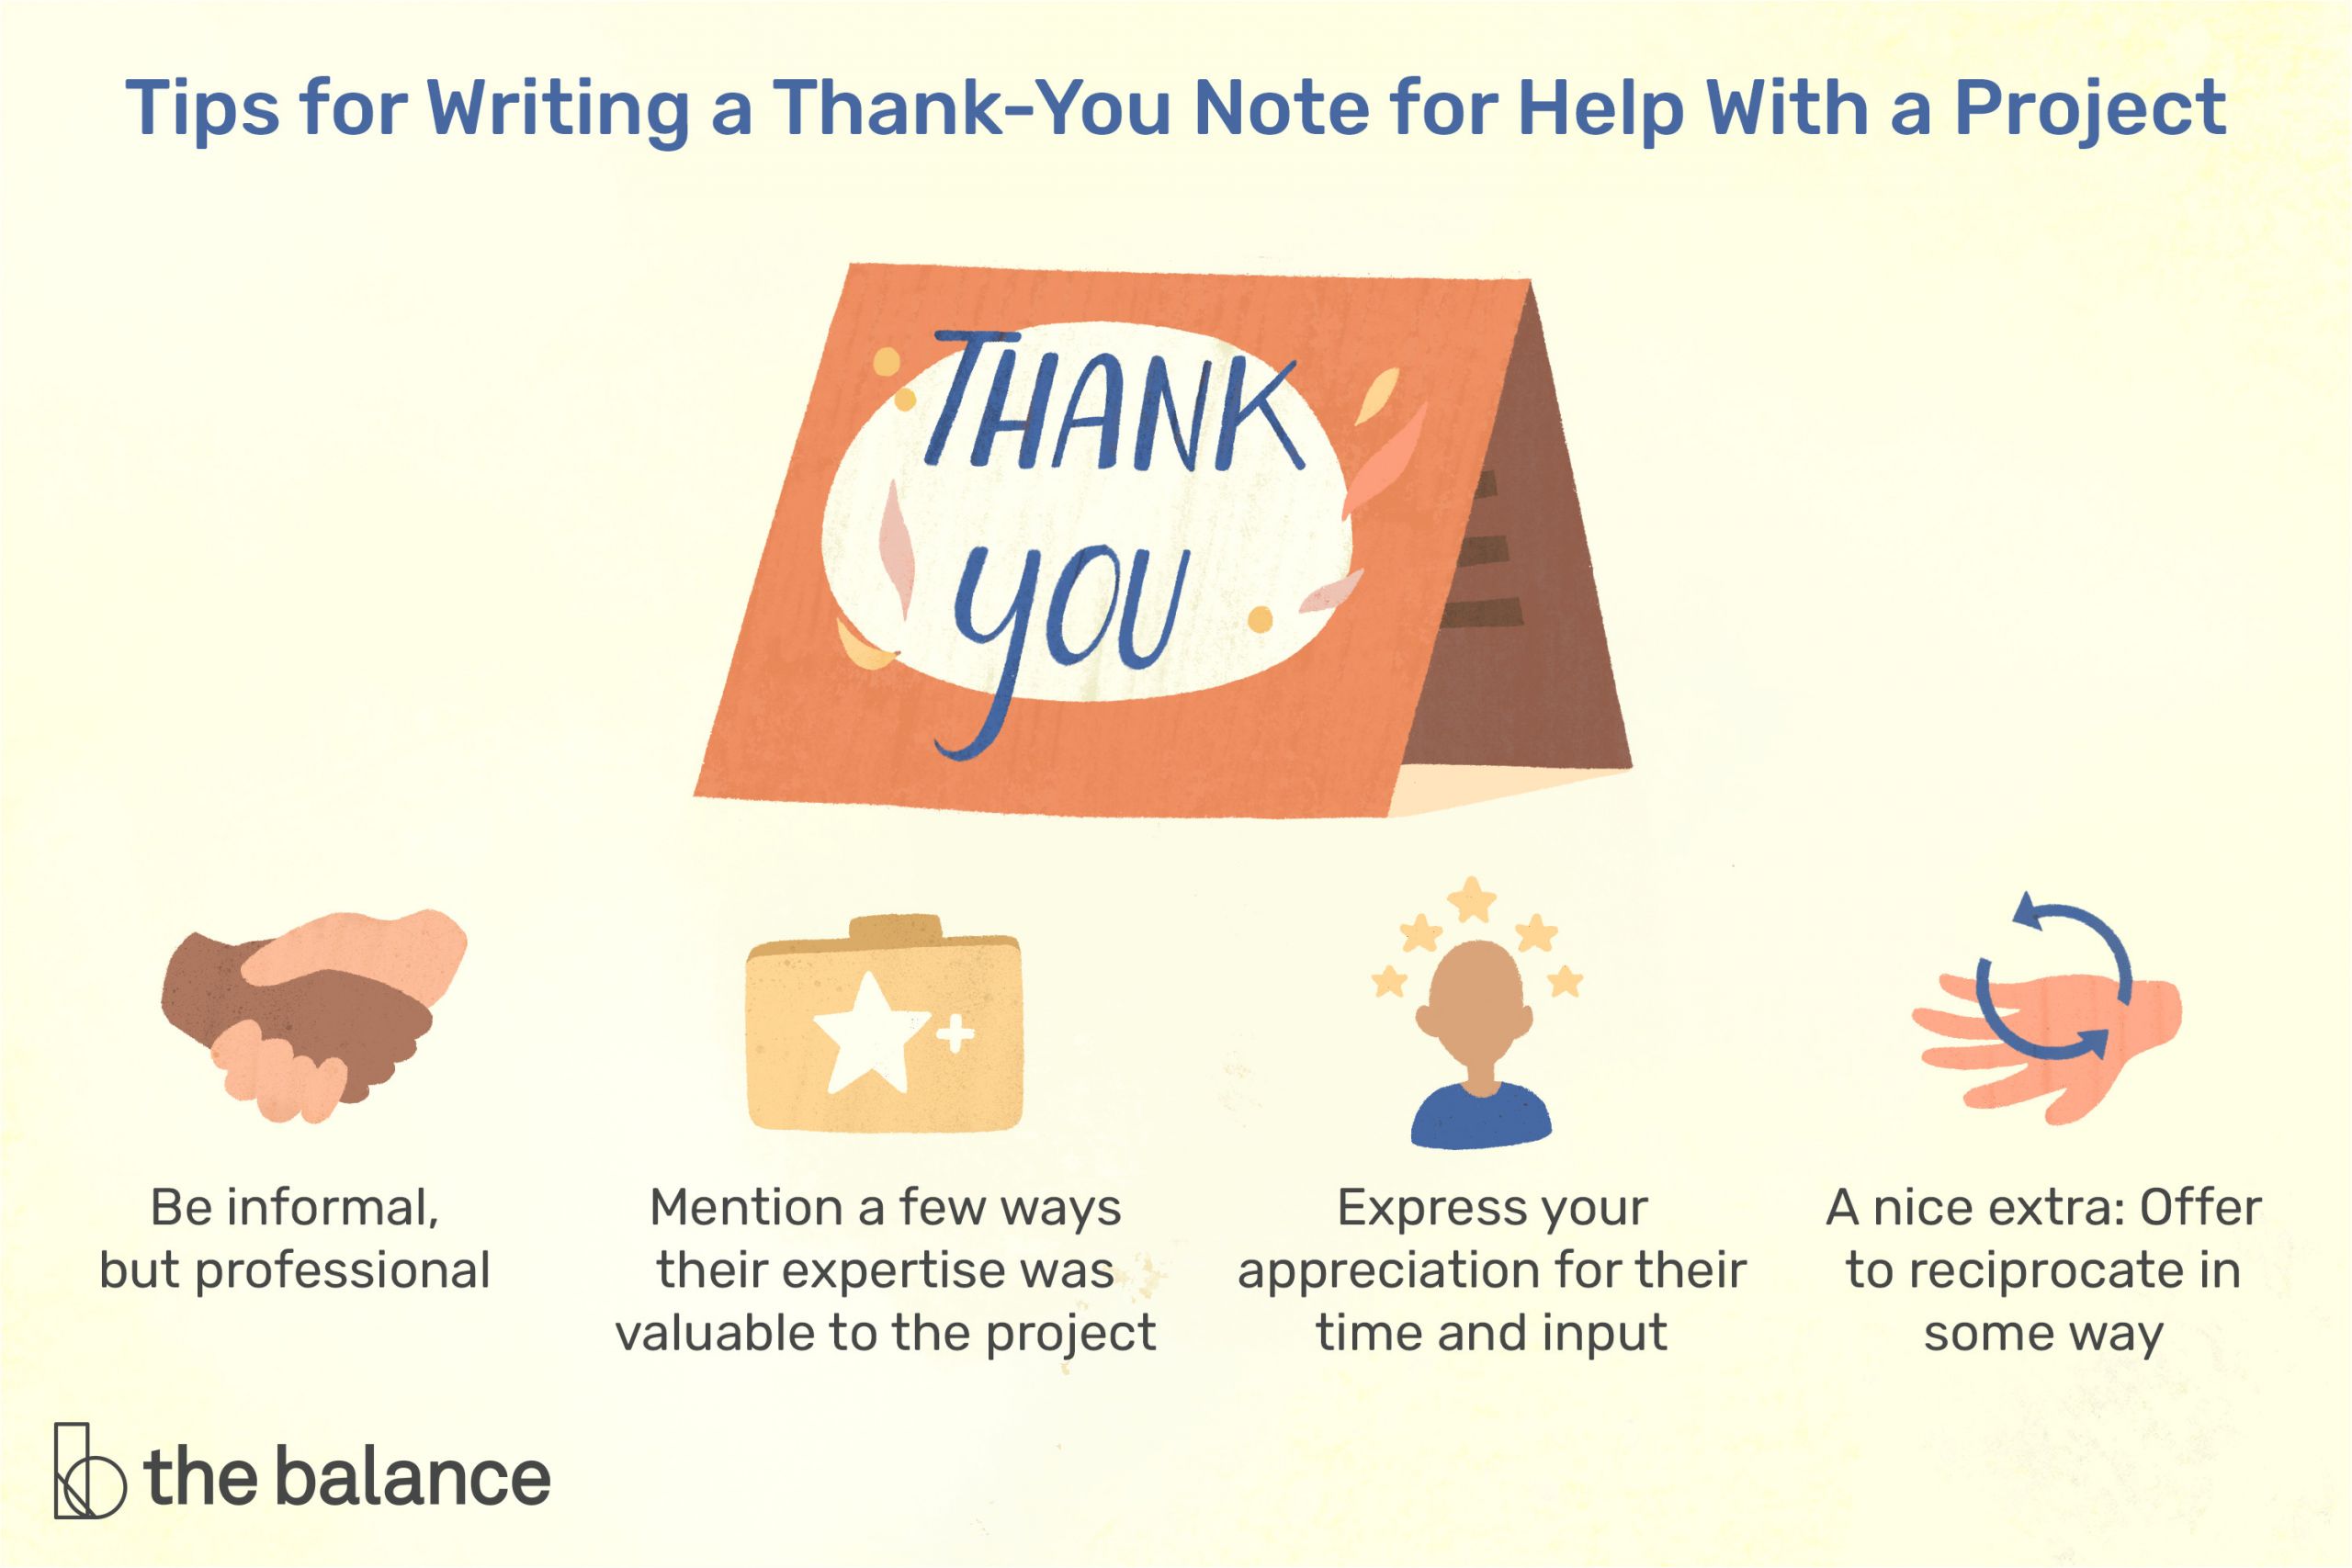 sample thank you letters for help with a project 2059495 final 621fa58879ce4493aa9633237d59887f png